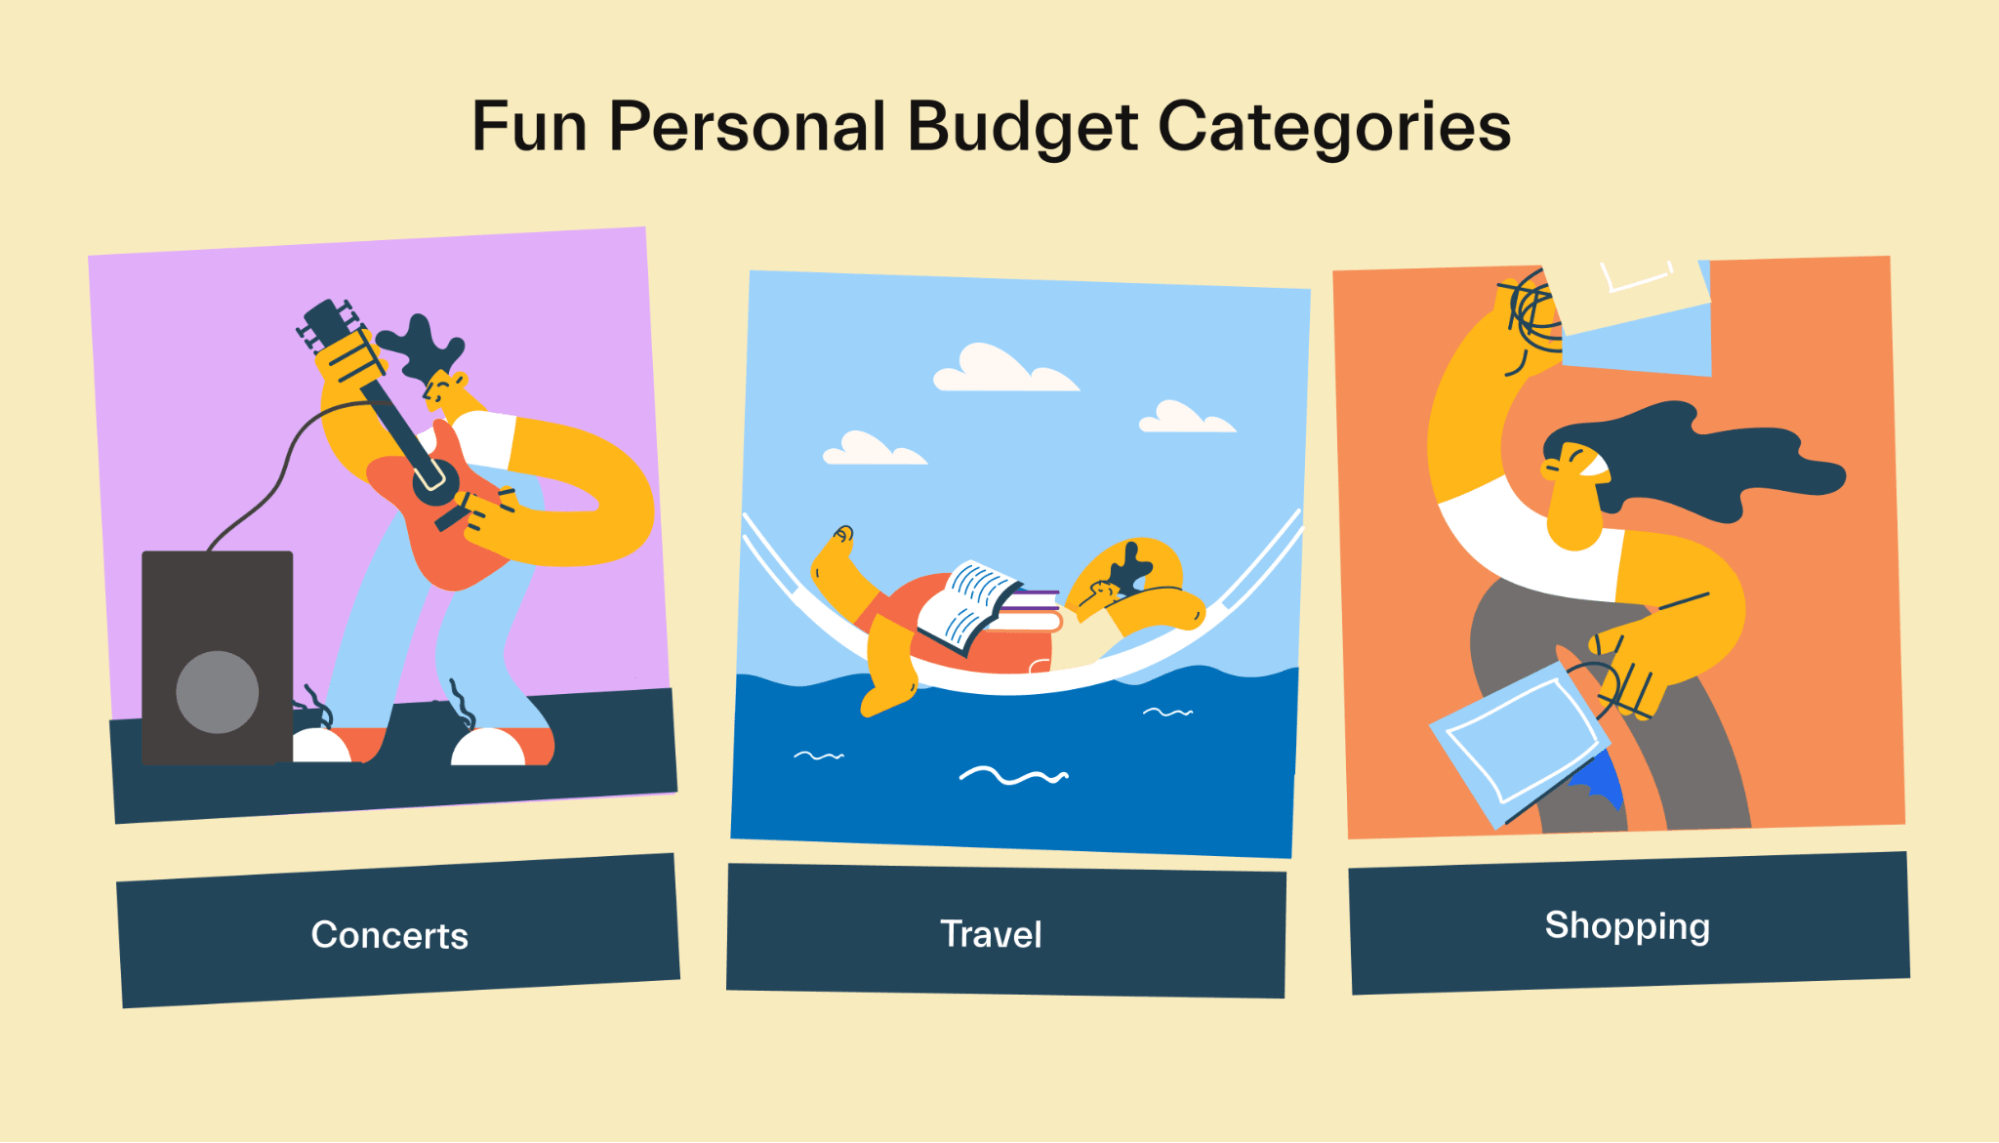 Fun Personal Budget Categories